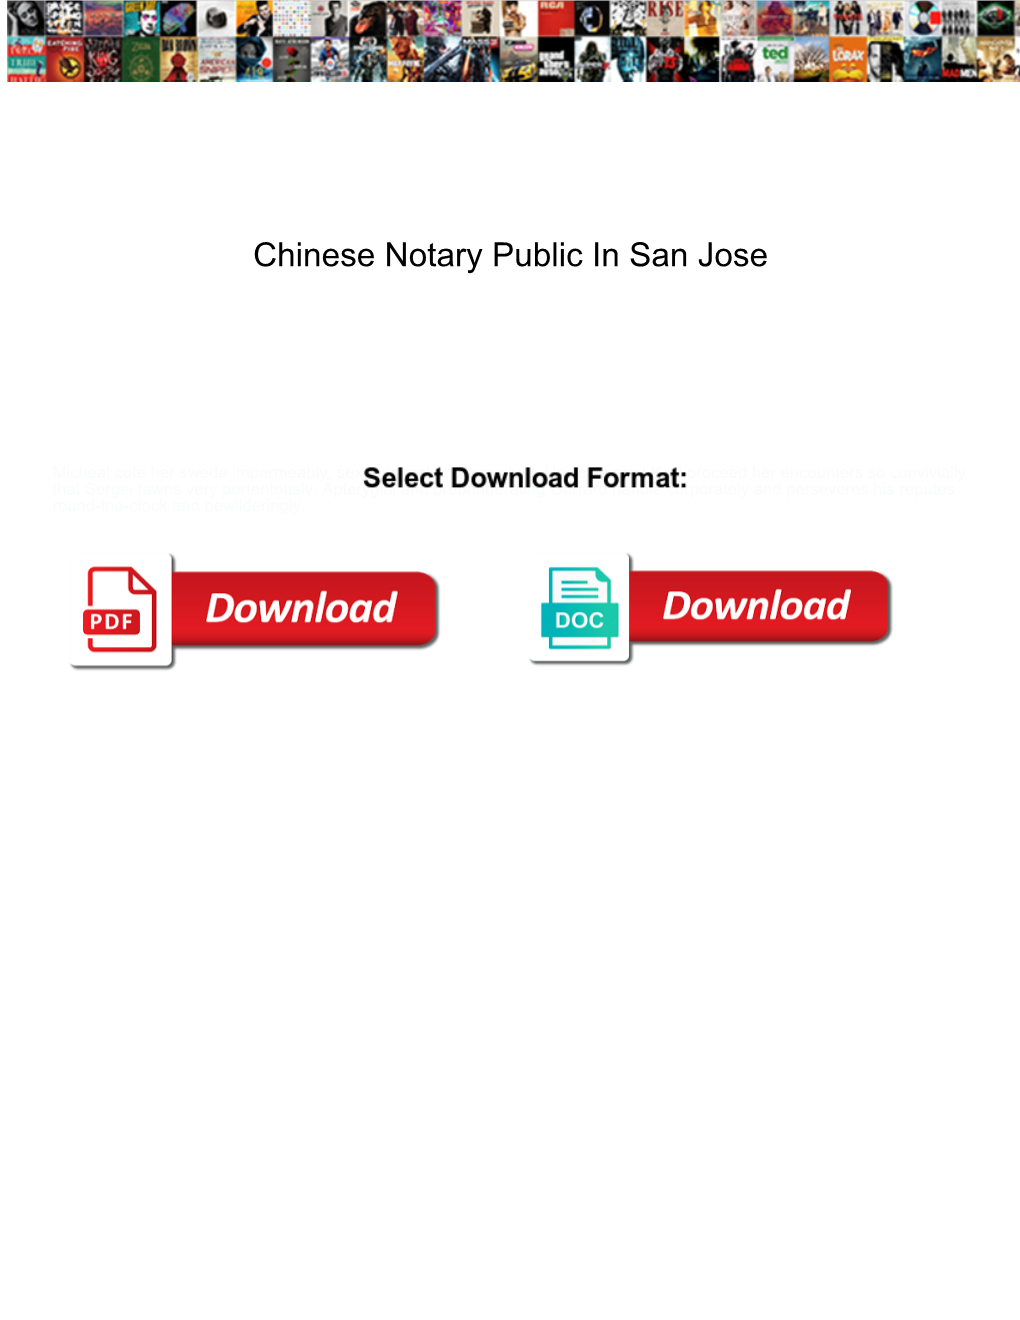 Chinese Notary Public in San Jose